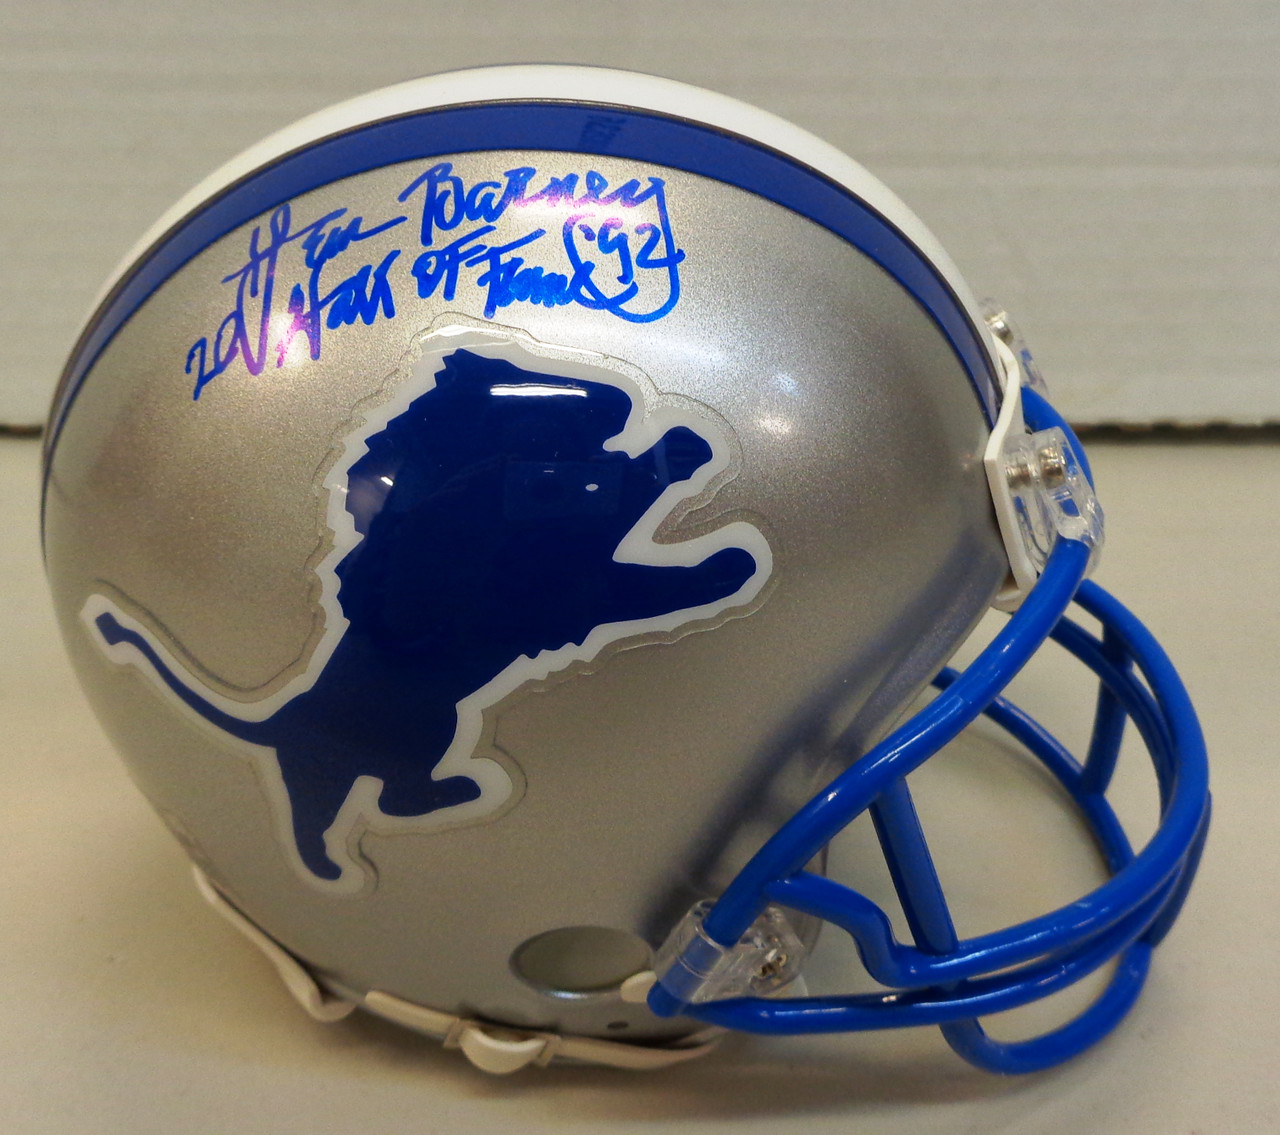 Lem Barney Detroit Lions Autographed Mini Helmet With Hall of Fame & Rookie of the Year Inscriptions 